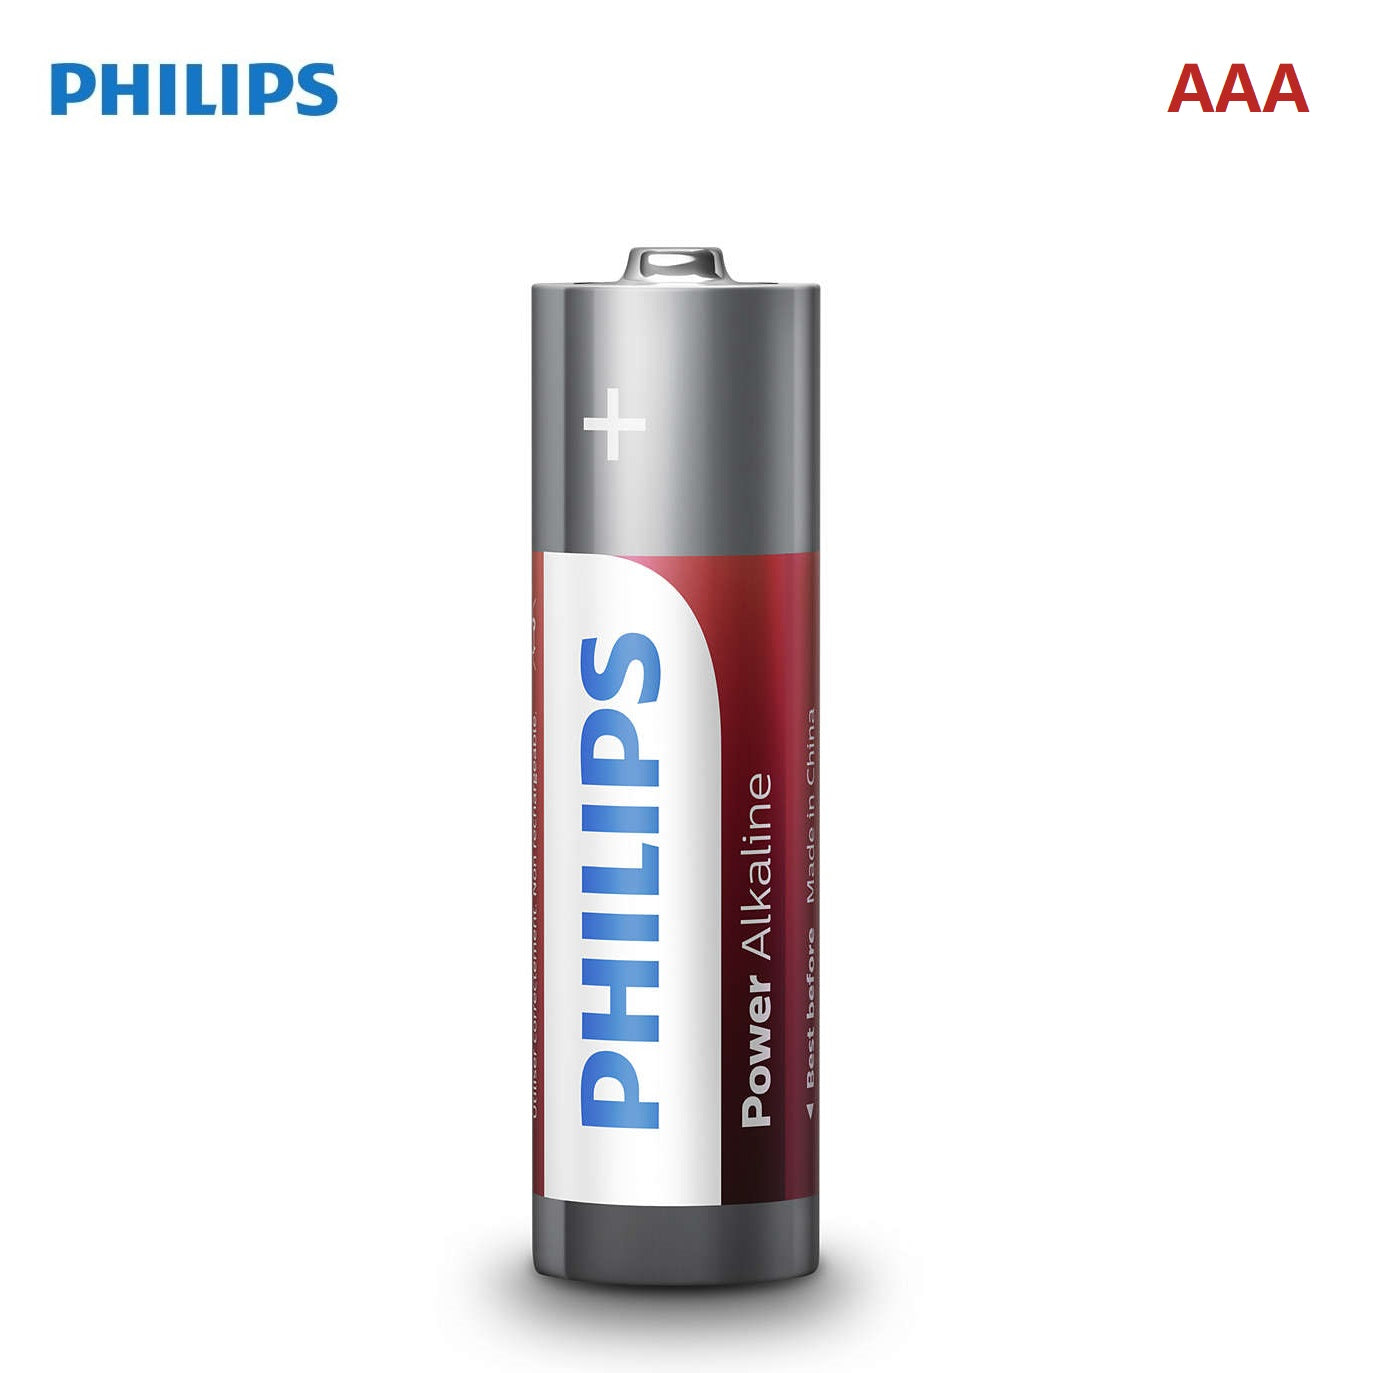 Philips: LR6 Power Alkaline Cell (Red)